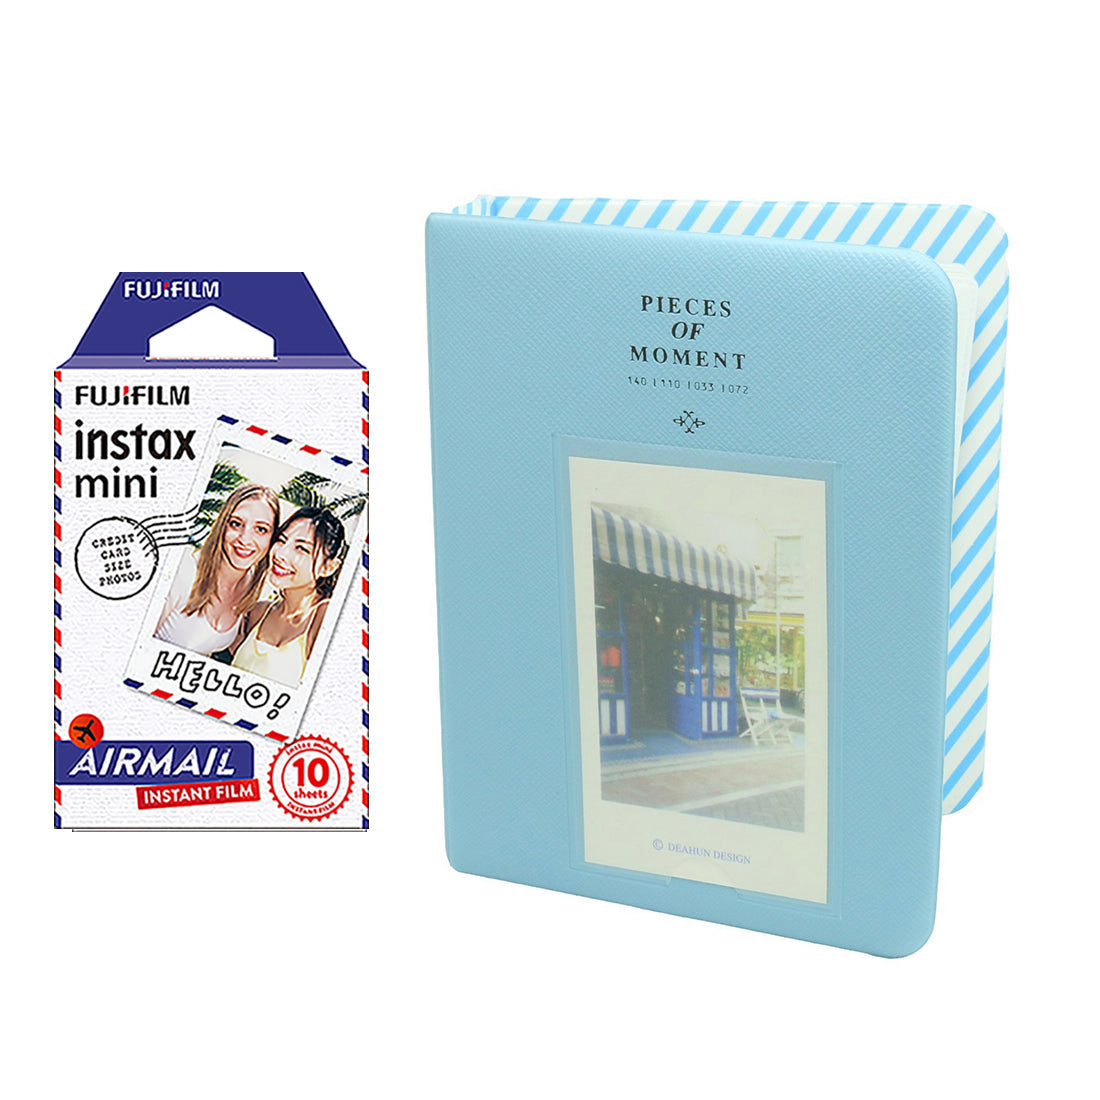 Fujifilm Instax Mini 10X1 airmail Instant Film with Instax Time Photo Album 64 Sheets (Water Blue)